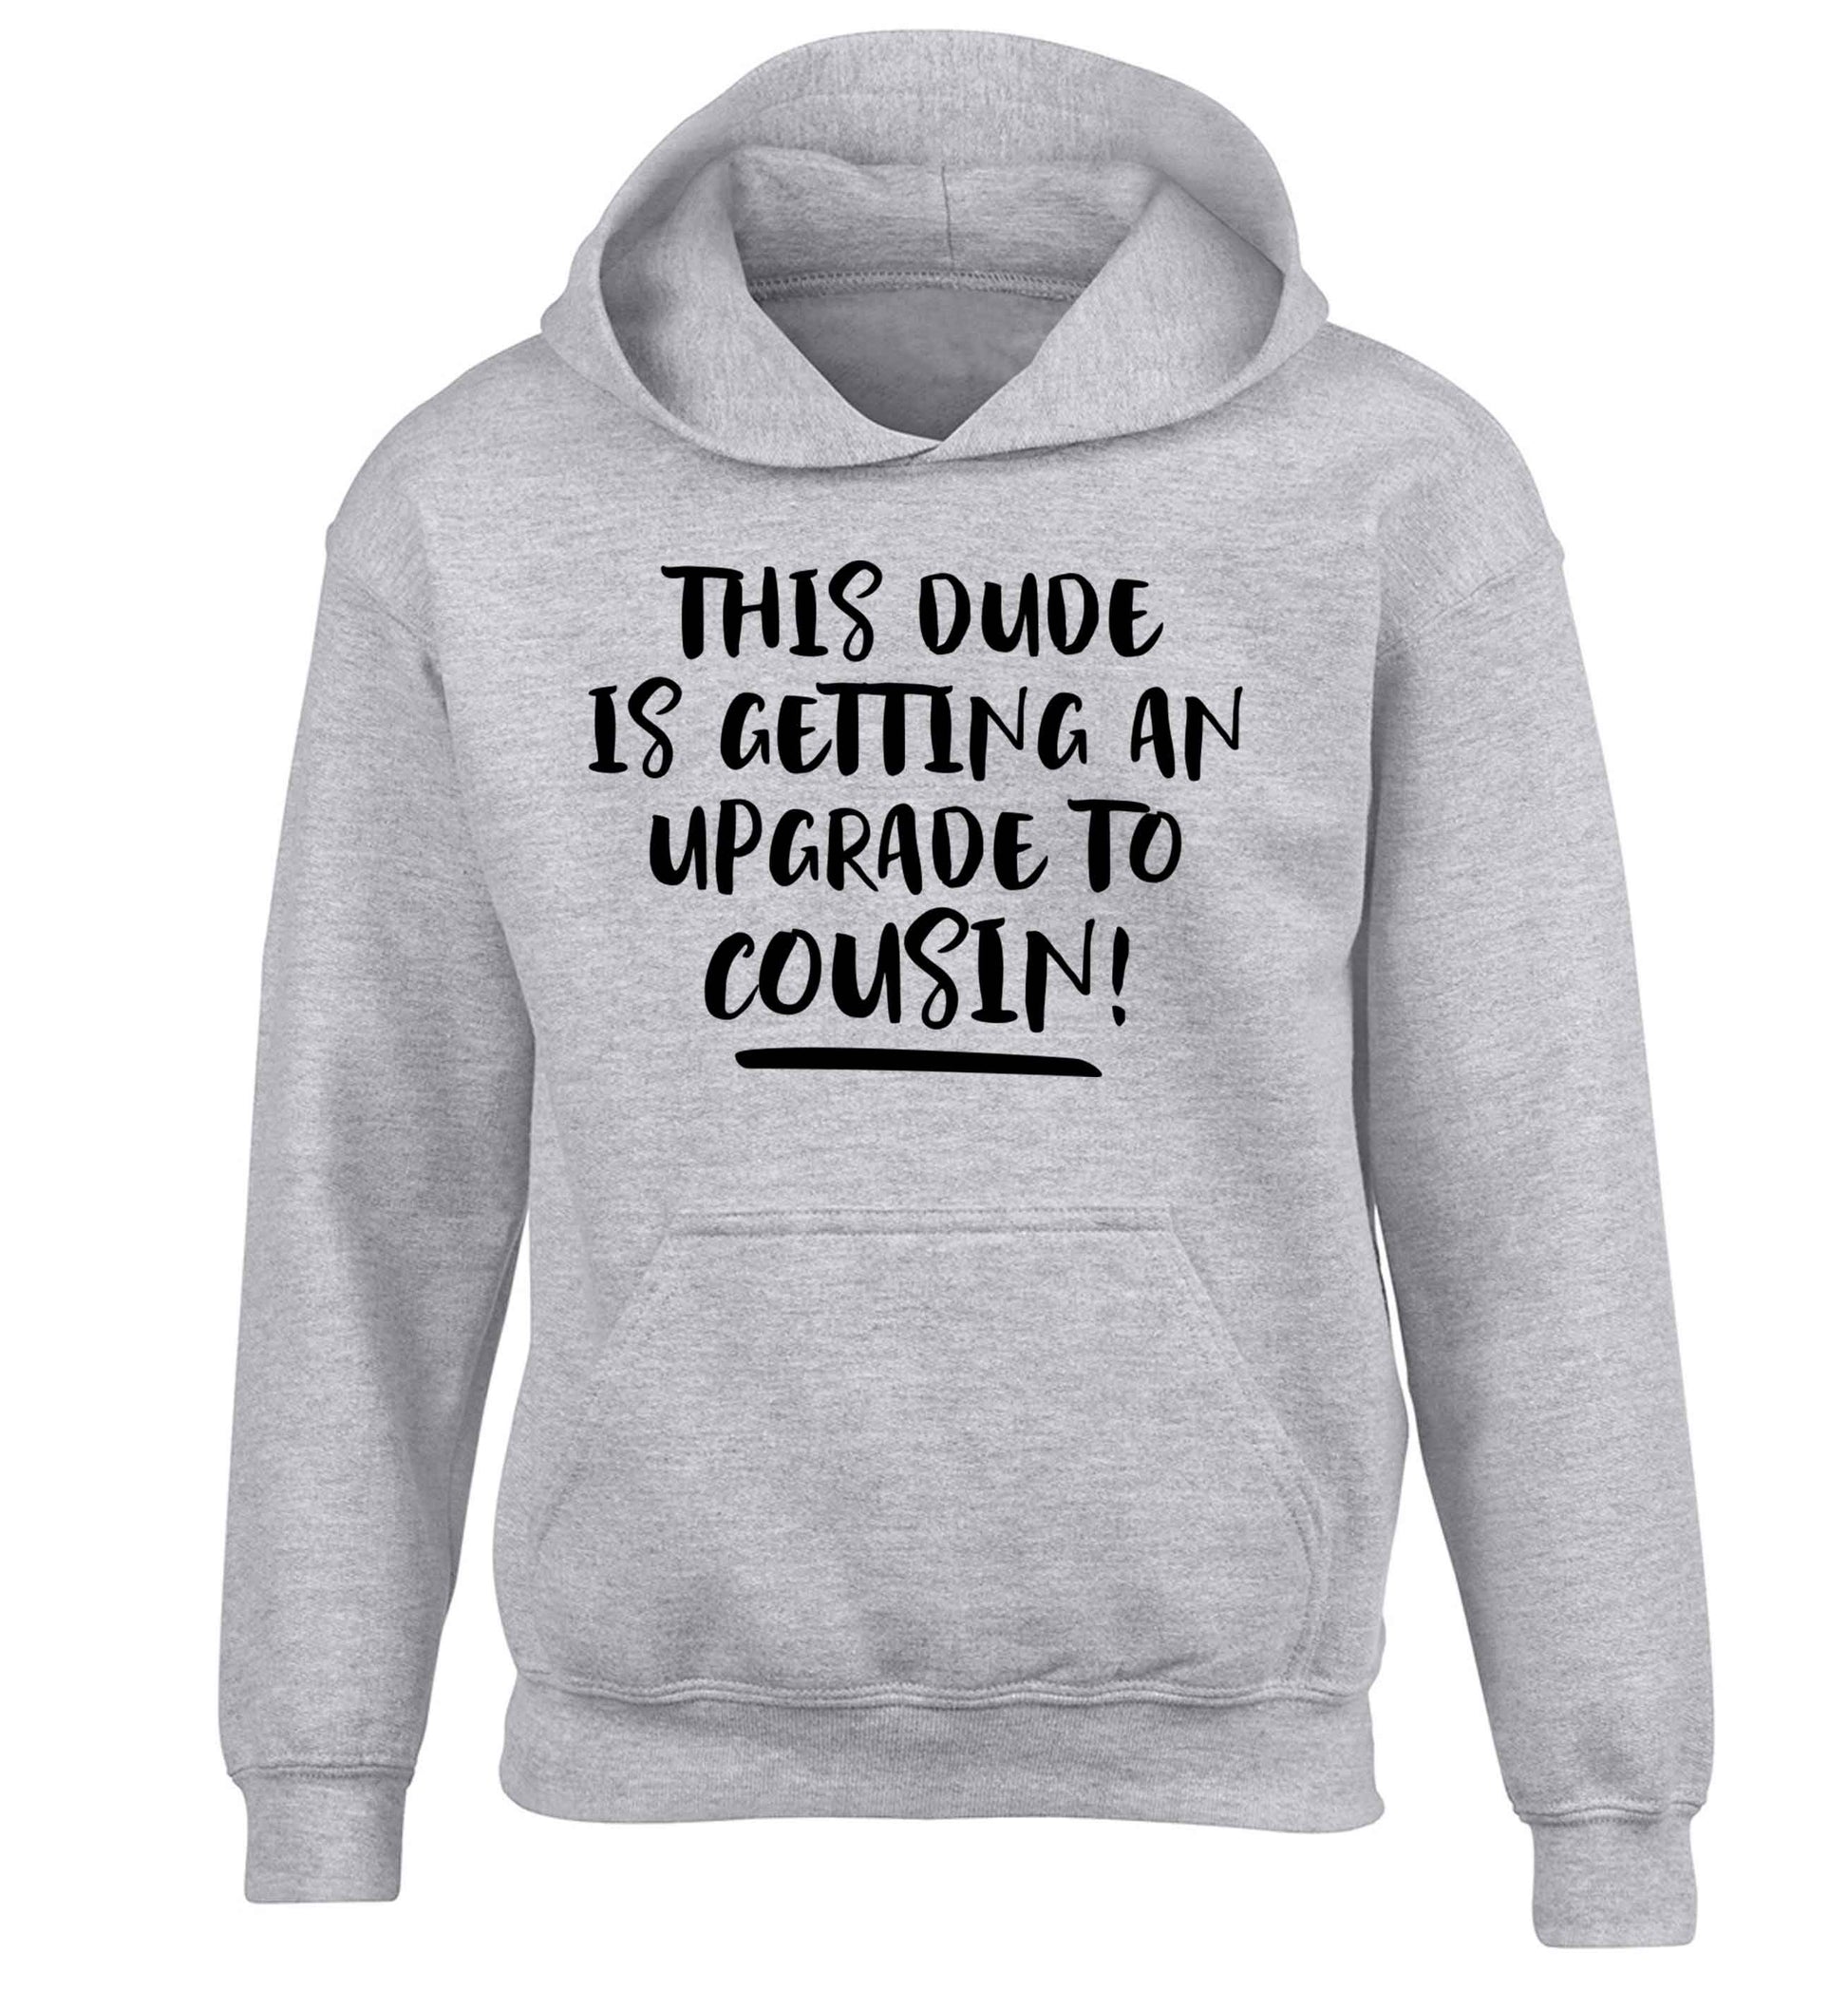 This dude is getting an upgrade to cousin! children's grey hoodie 12-13 Years